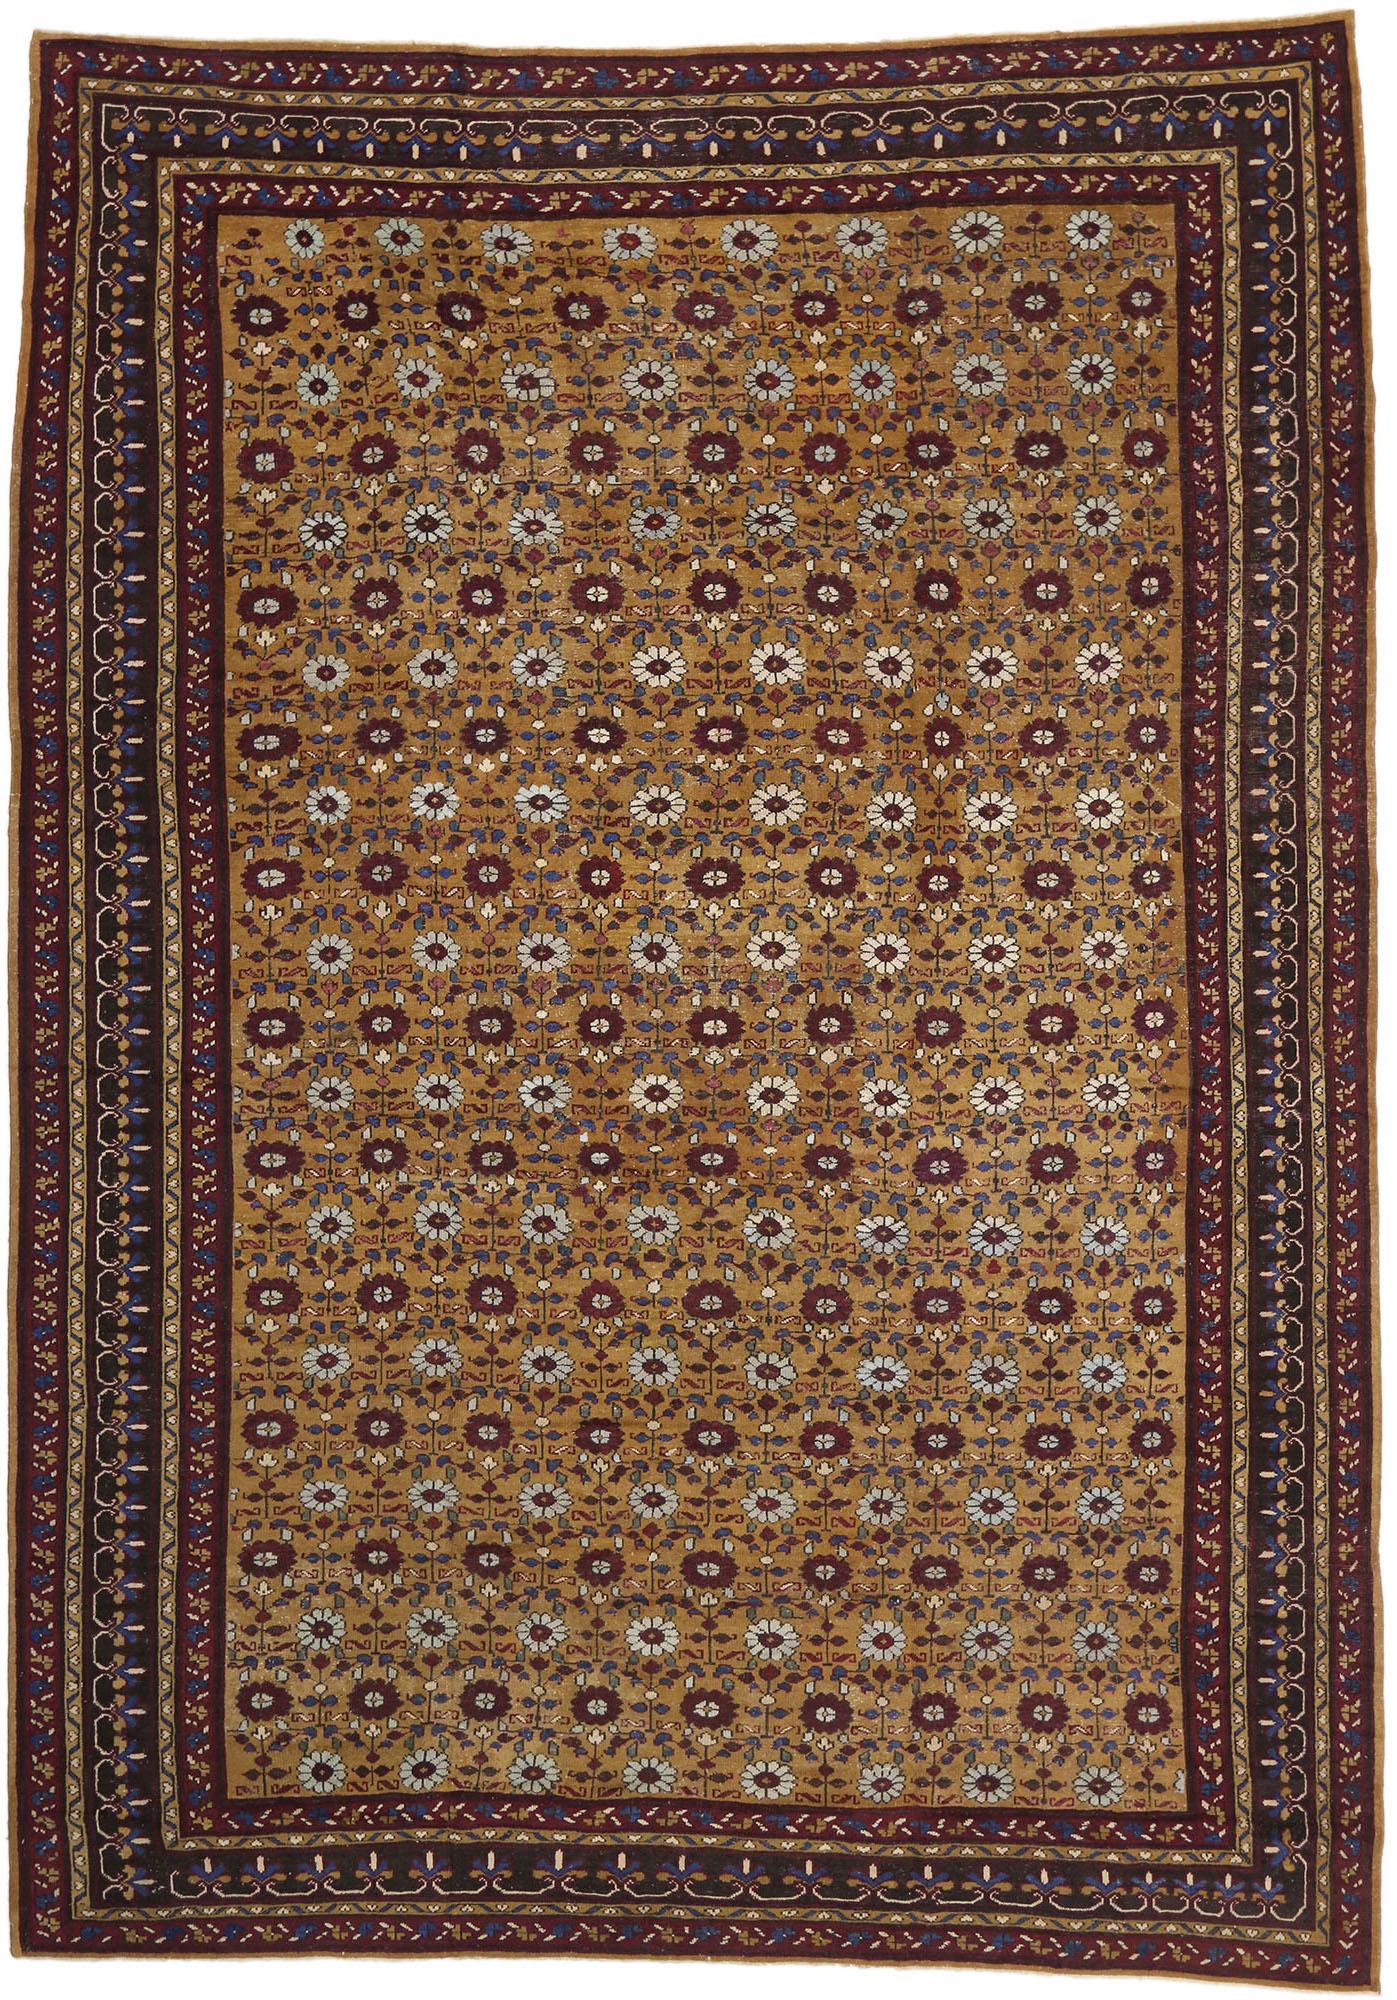 Late 19th Century Antique Indian Agra Carpet, 12'00 x 16'09 For Sale 2